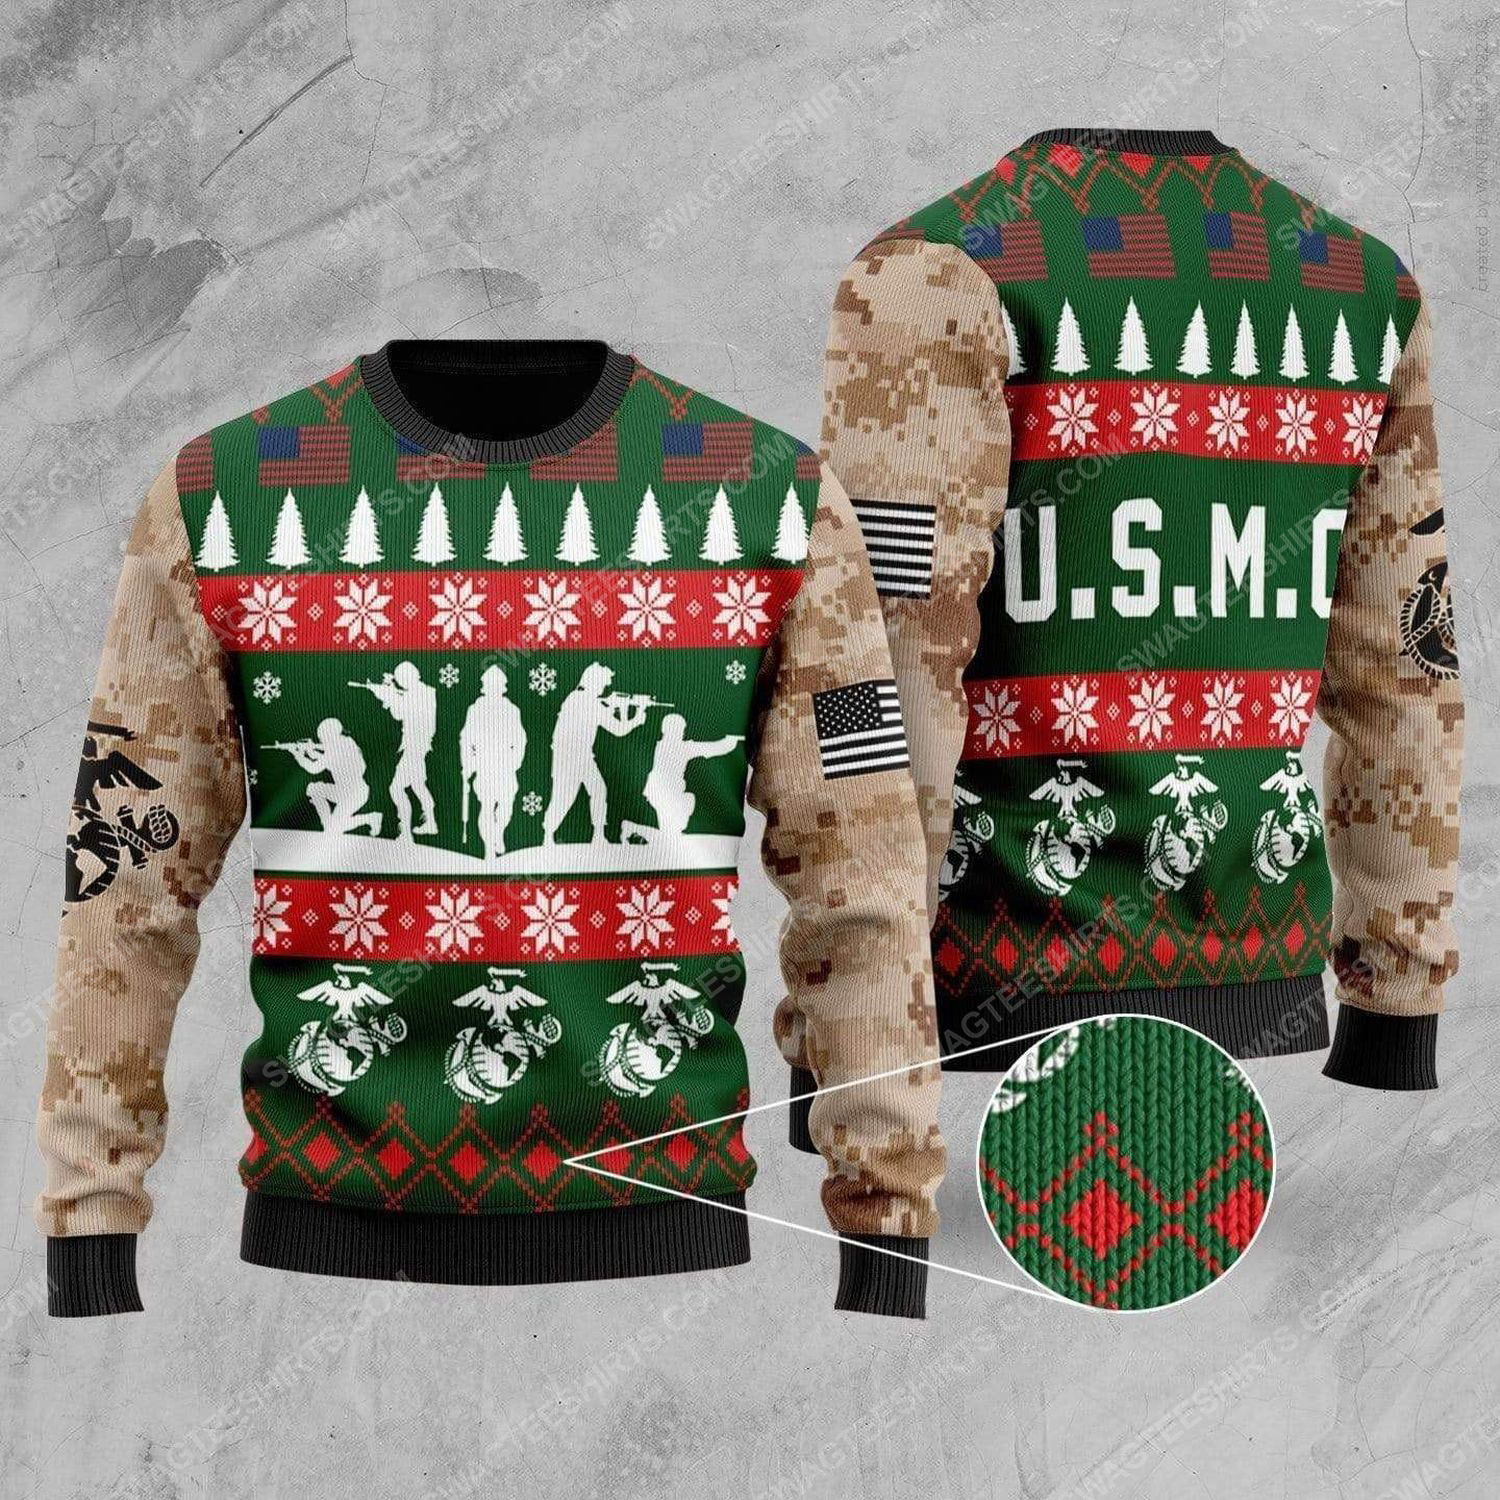 [special edition] United states marine corps all over print ugly christmas sweater – maria